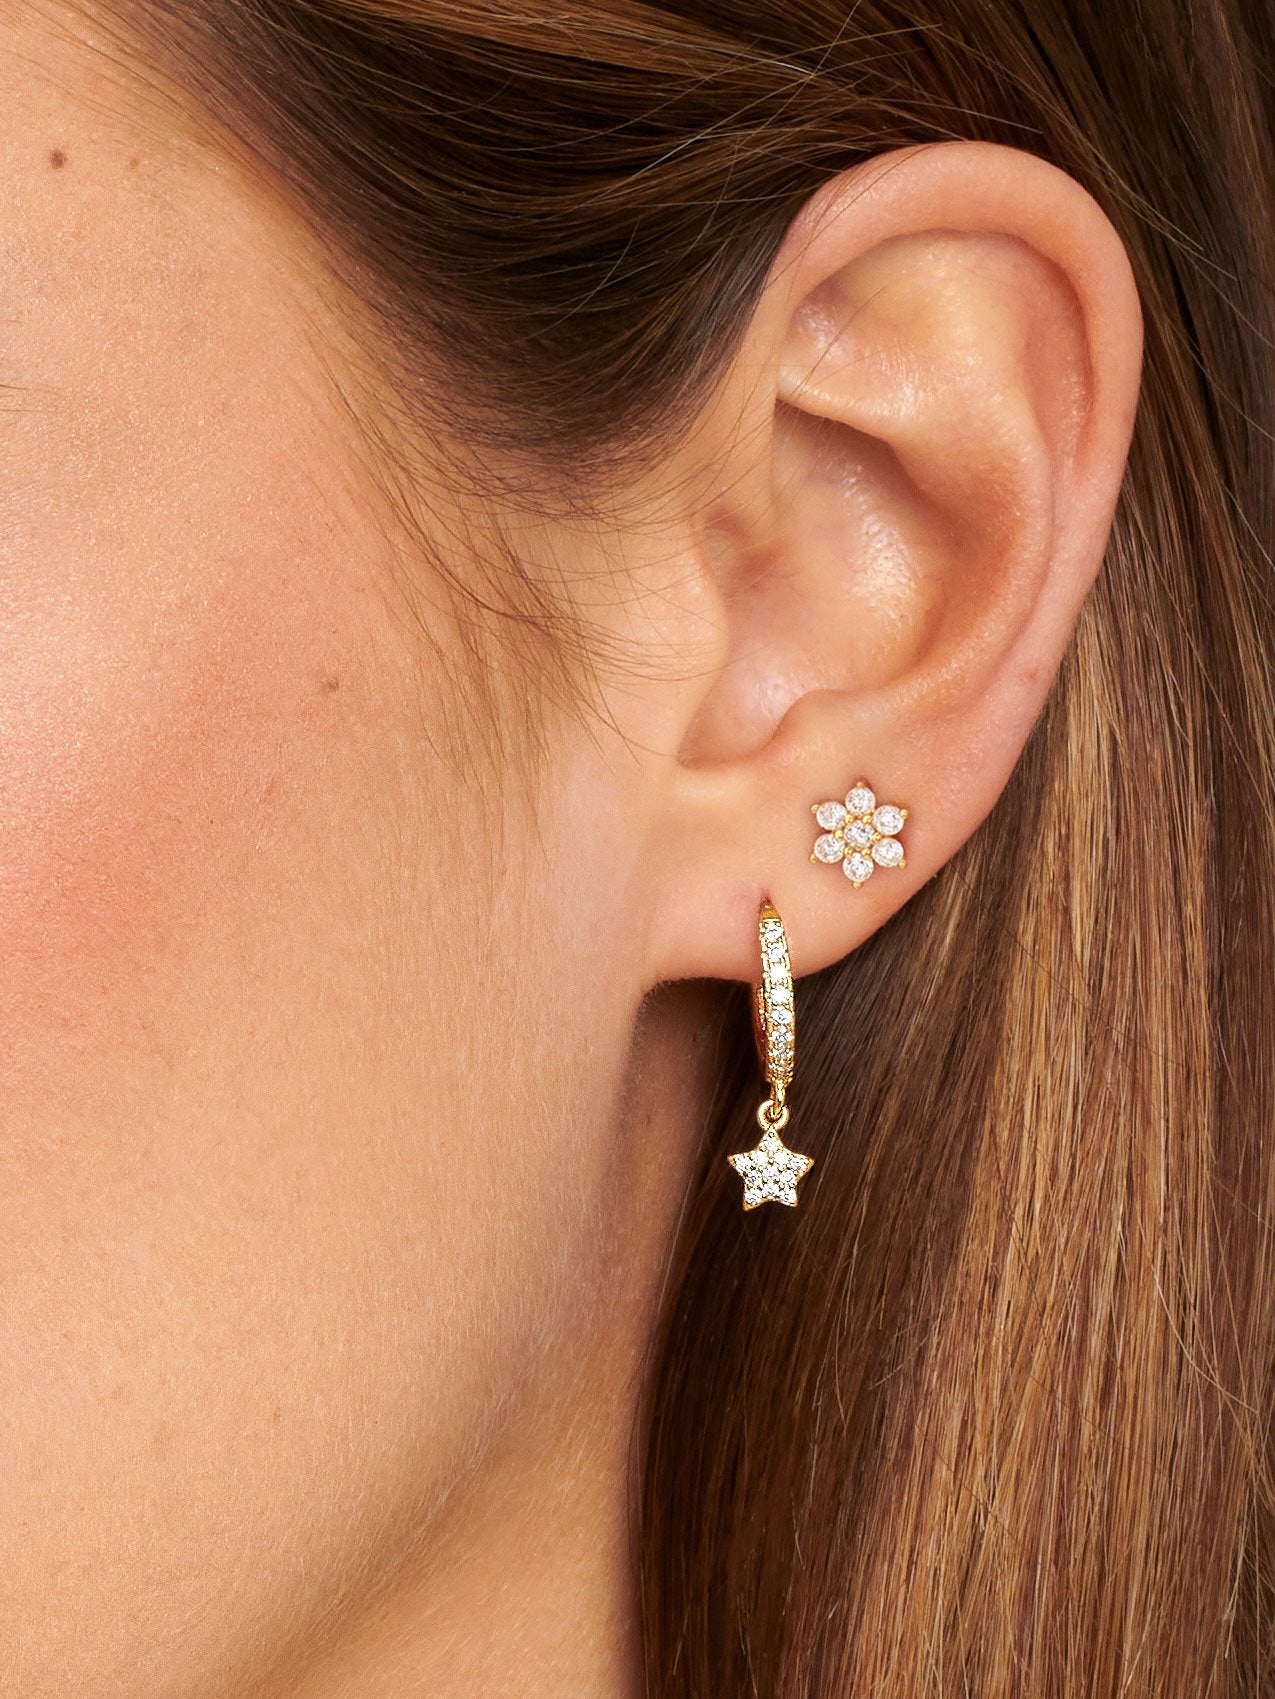 Gold Flower Stud Earrings - Small (18ct Gold Plated 925 Sterling Silver) - Muchv Jewellery